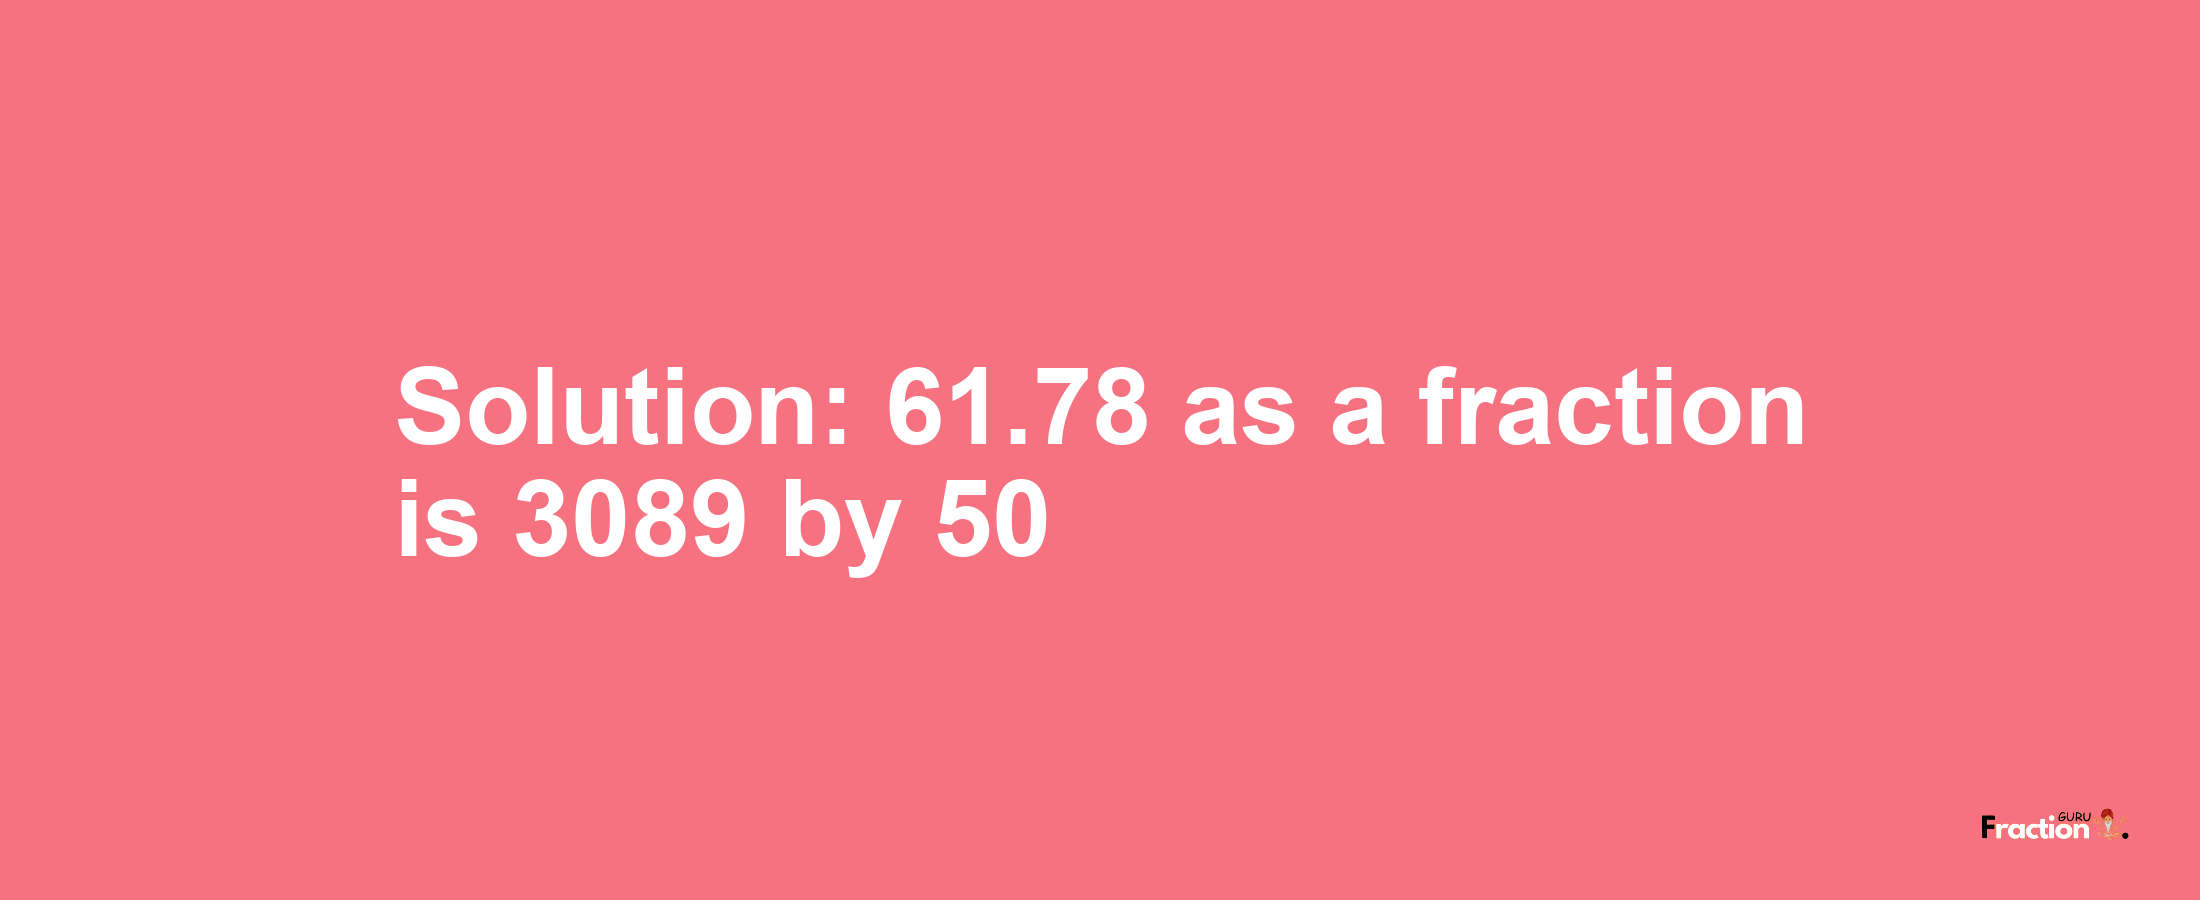 Solution:61.78 as a fraction is 3089/50